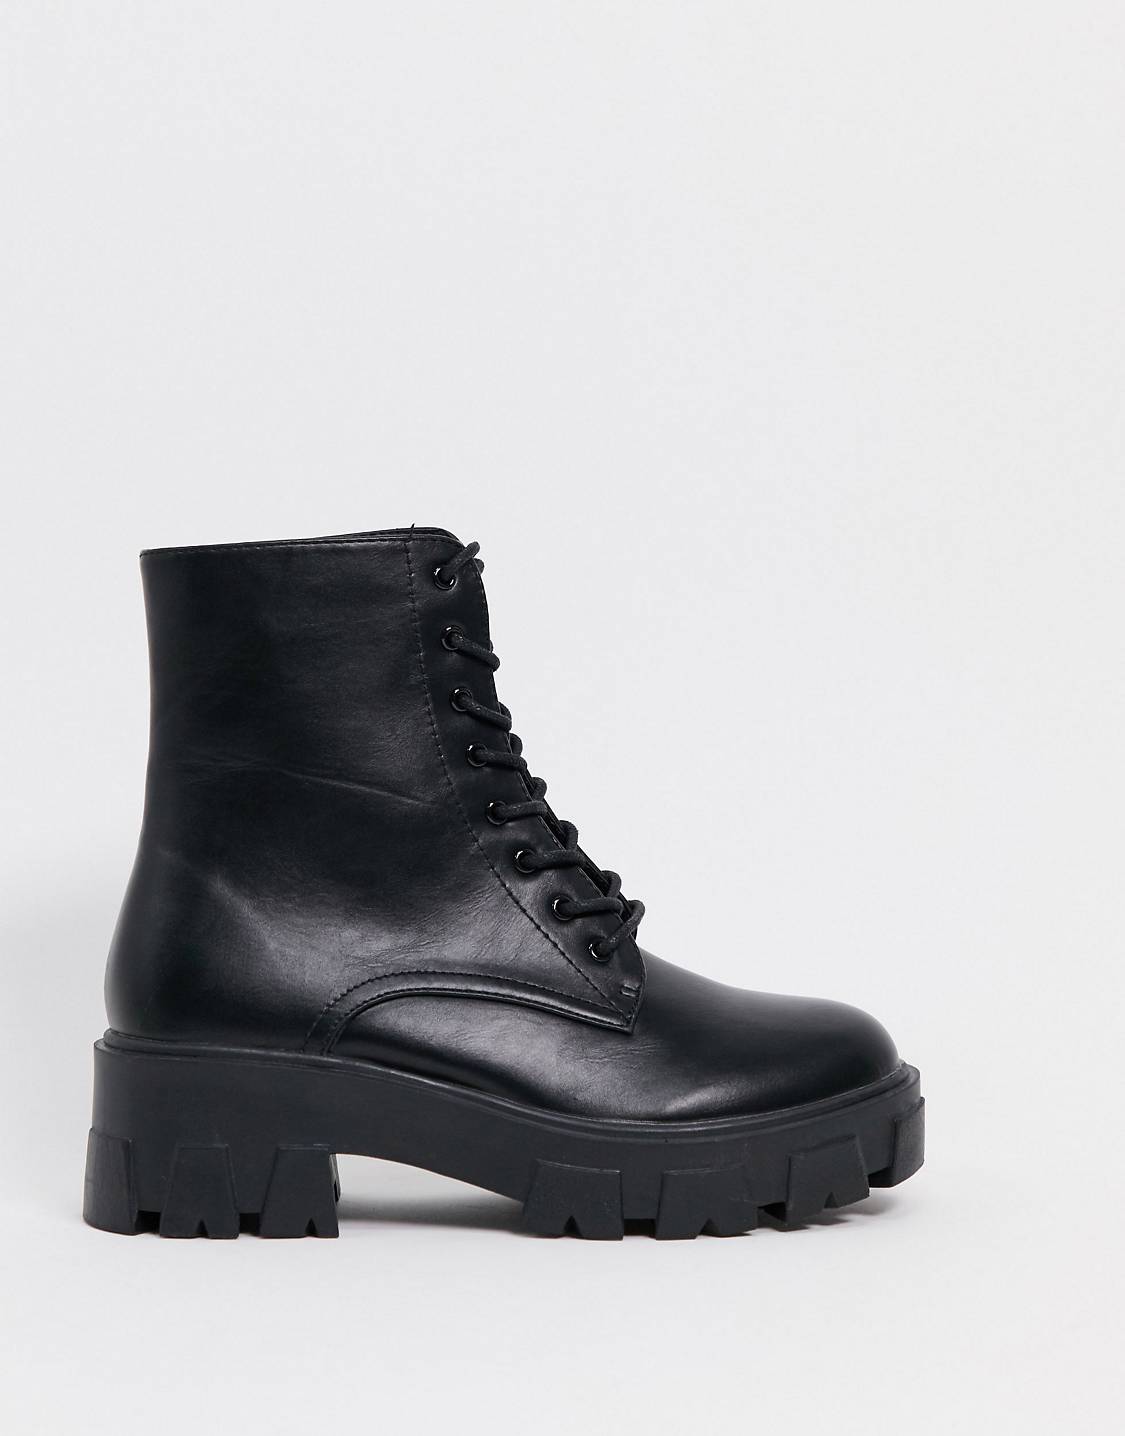 Raid + Rexx chunky ankle boots in black